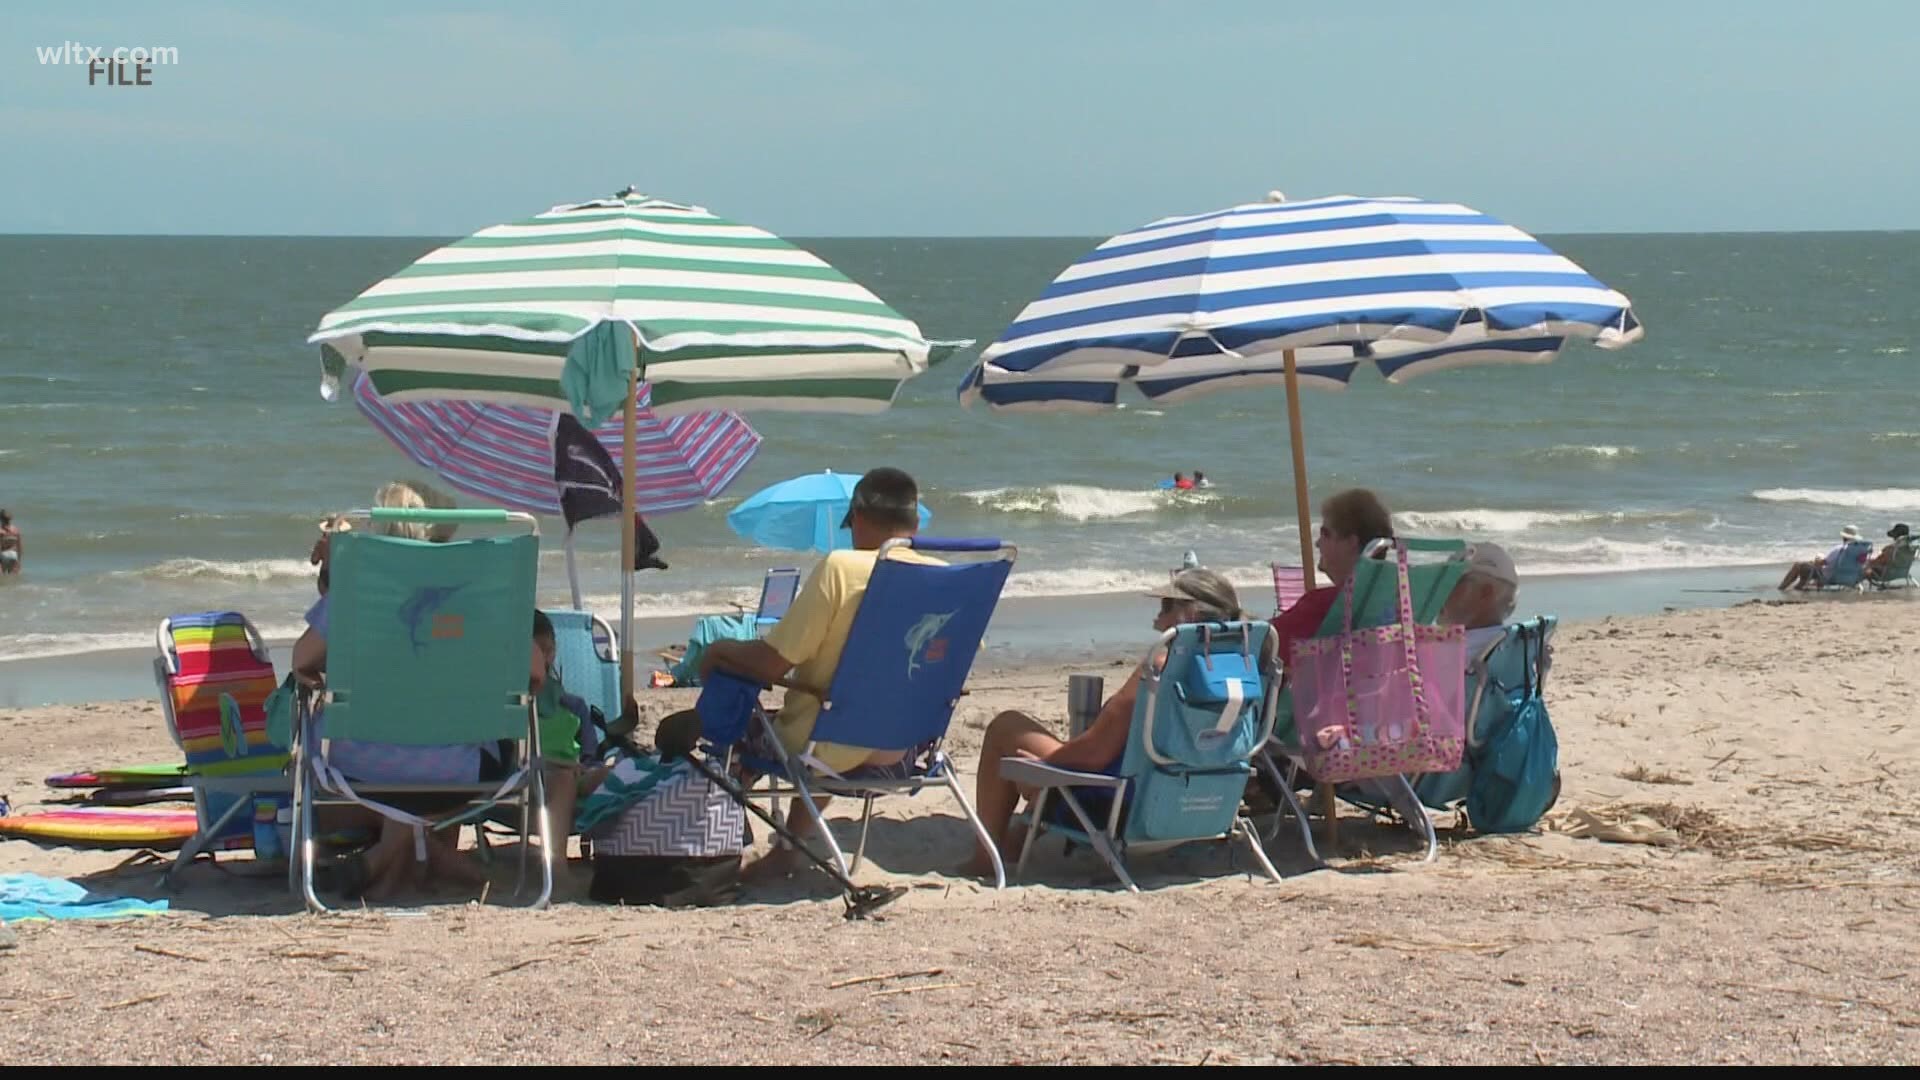 As more people get vaccinated and rules begin to relax many thoughts are turning to vacations at the beach.